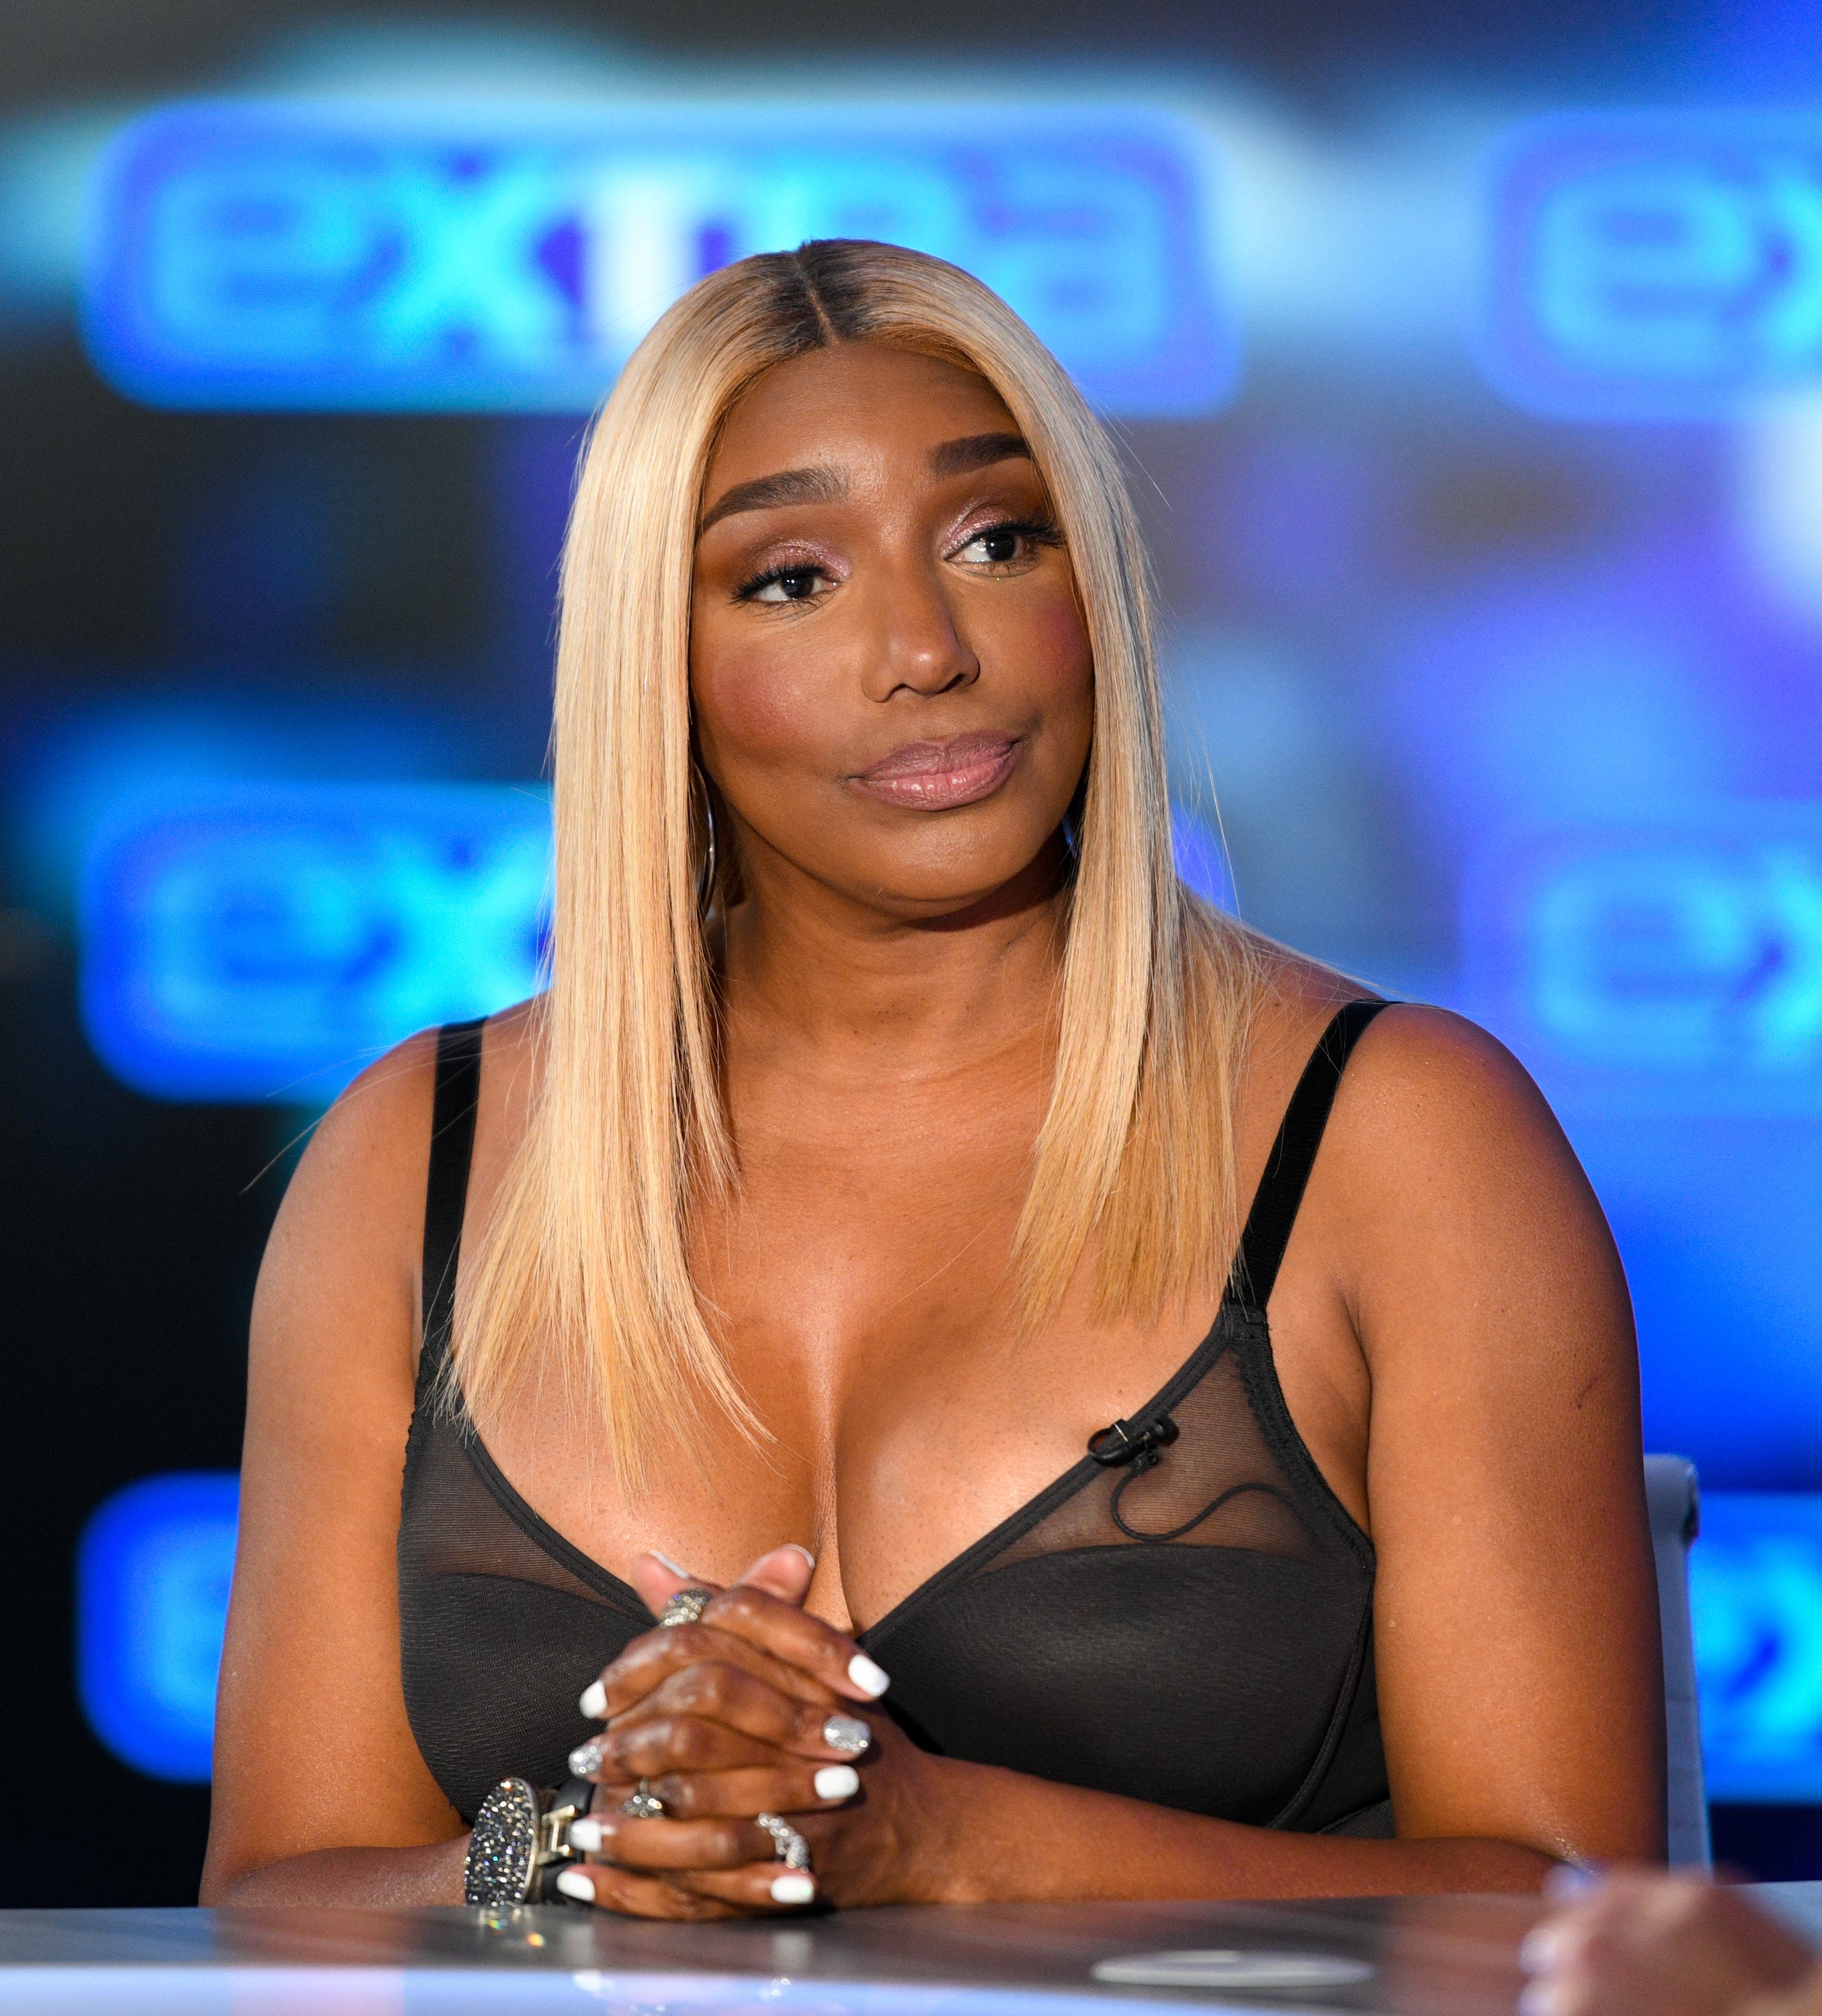  NeNe Leakes visits "Extra" at Burbank Studios on November 18, 2019 in Burbank, California. | Source: Getty Images